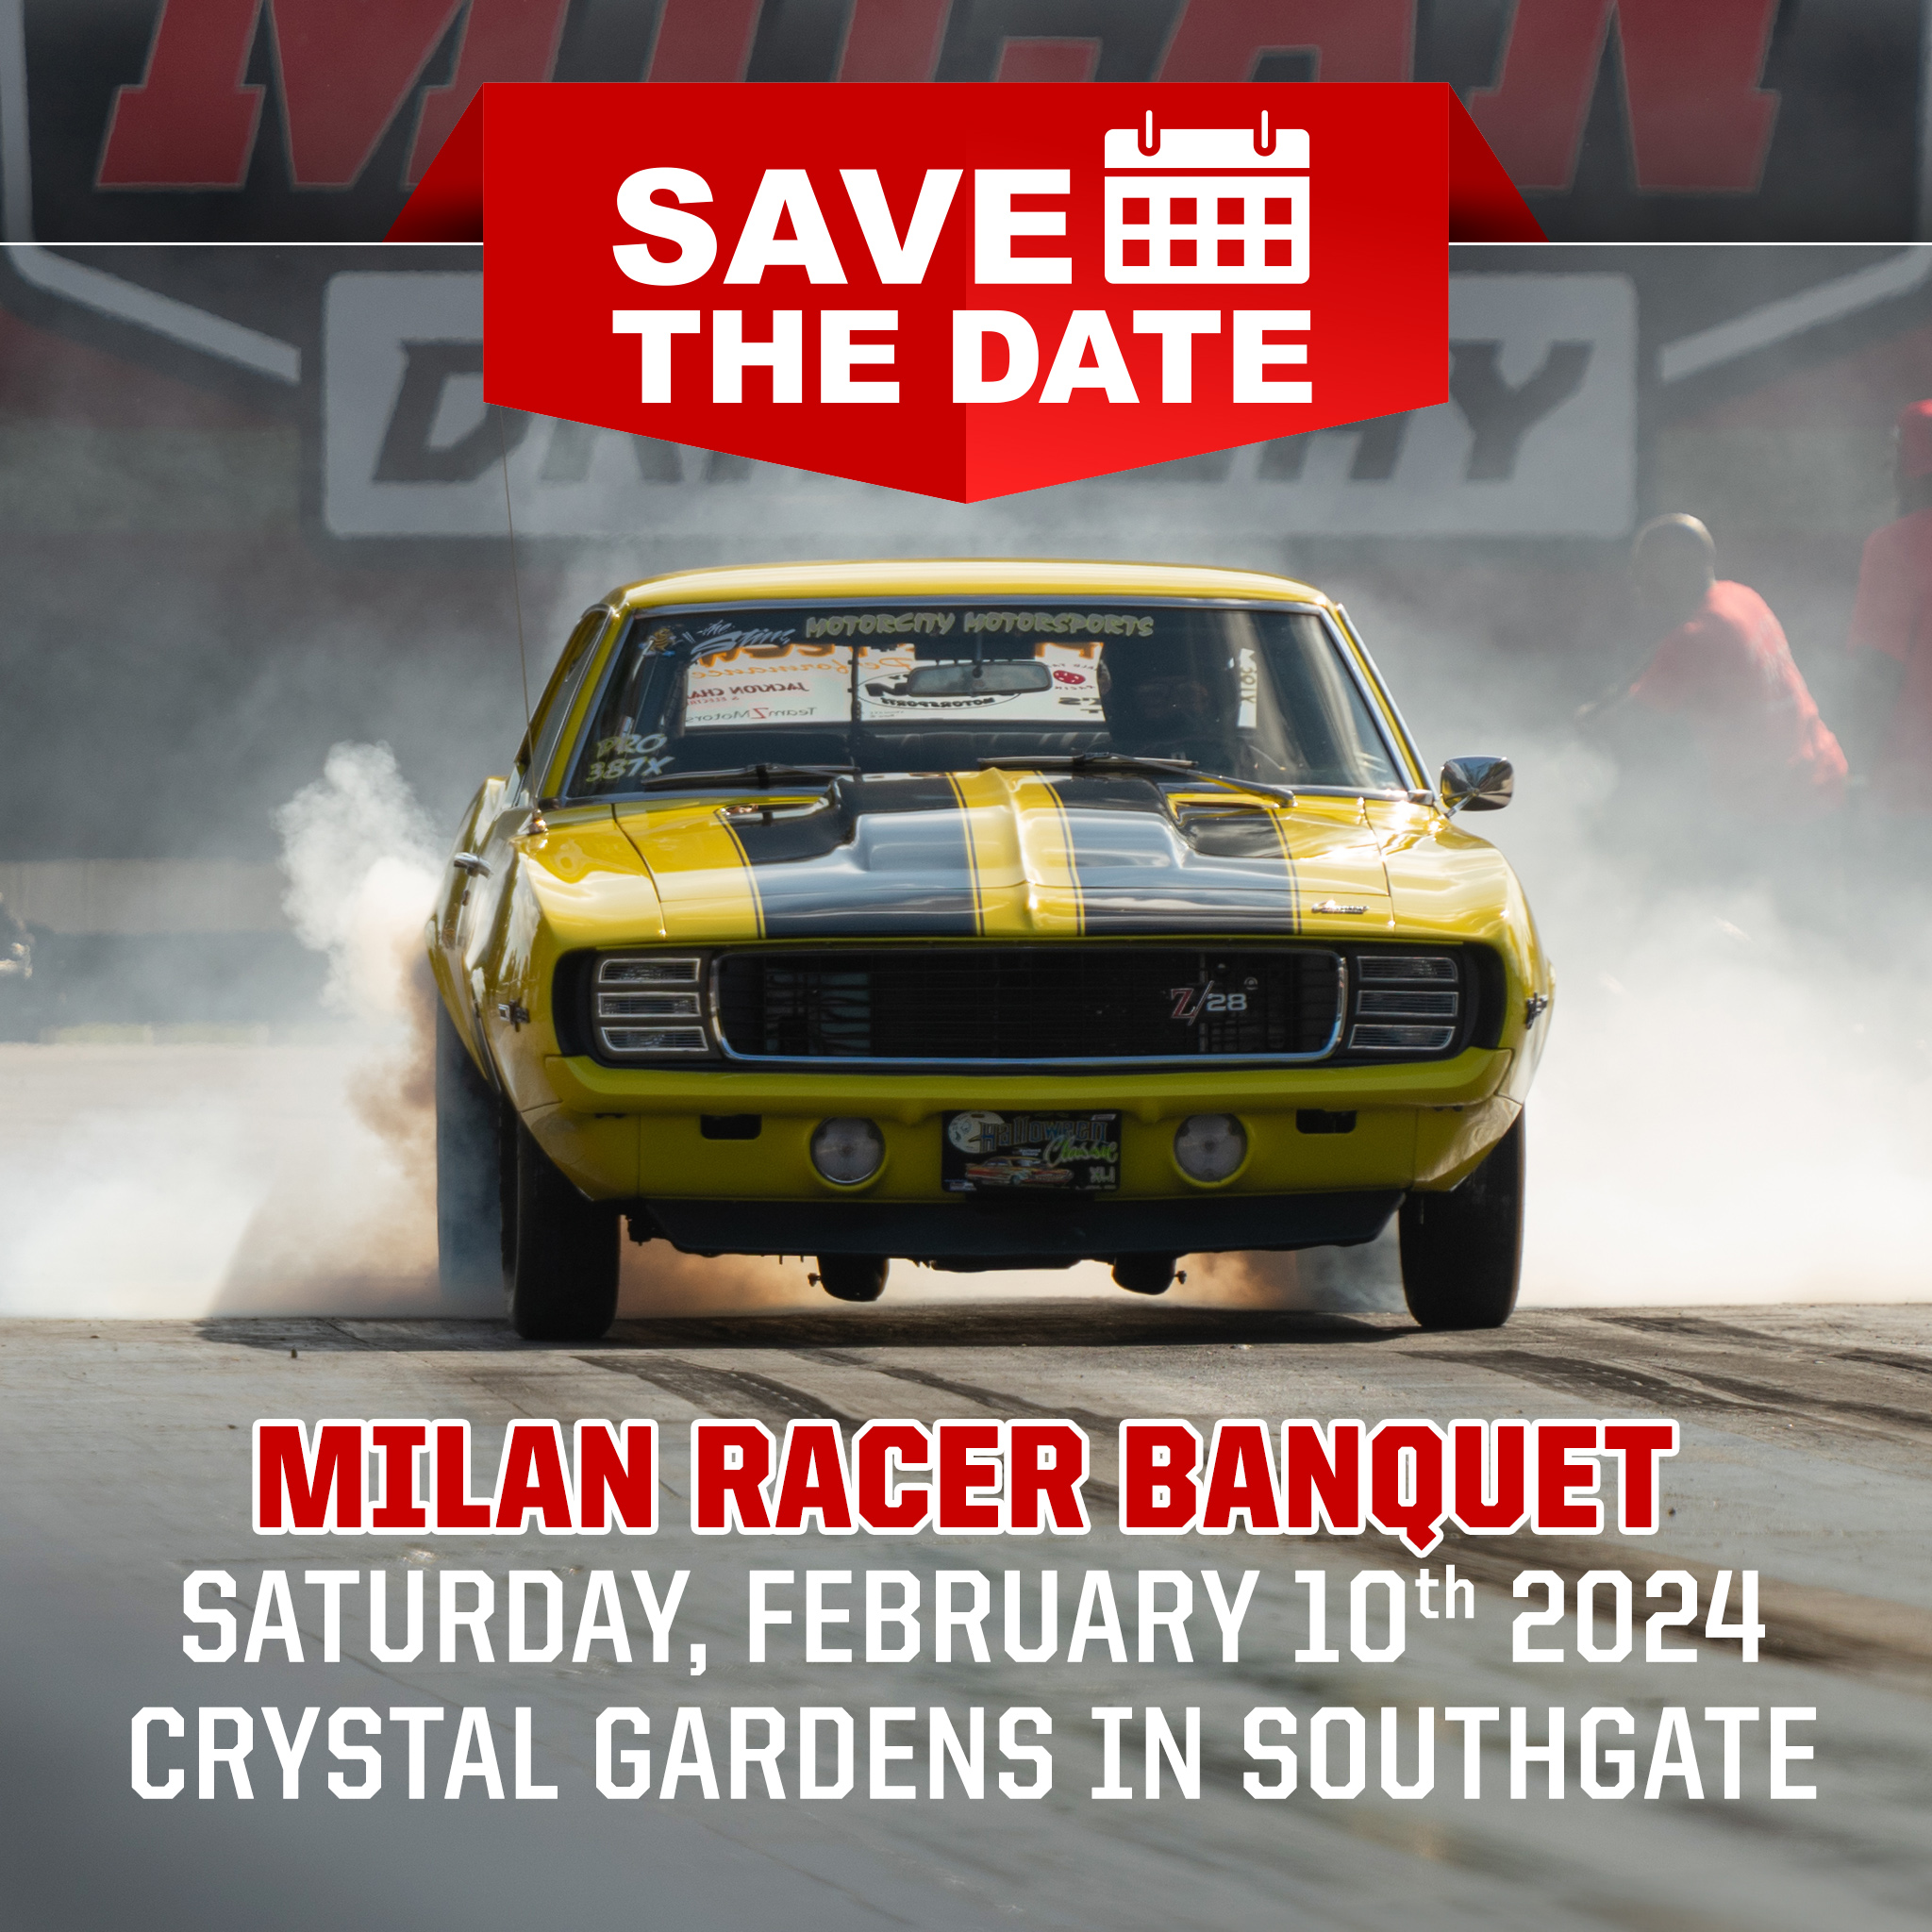 Save The Date: Milan Racer Banquet